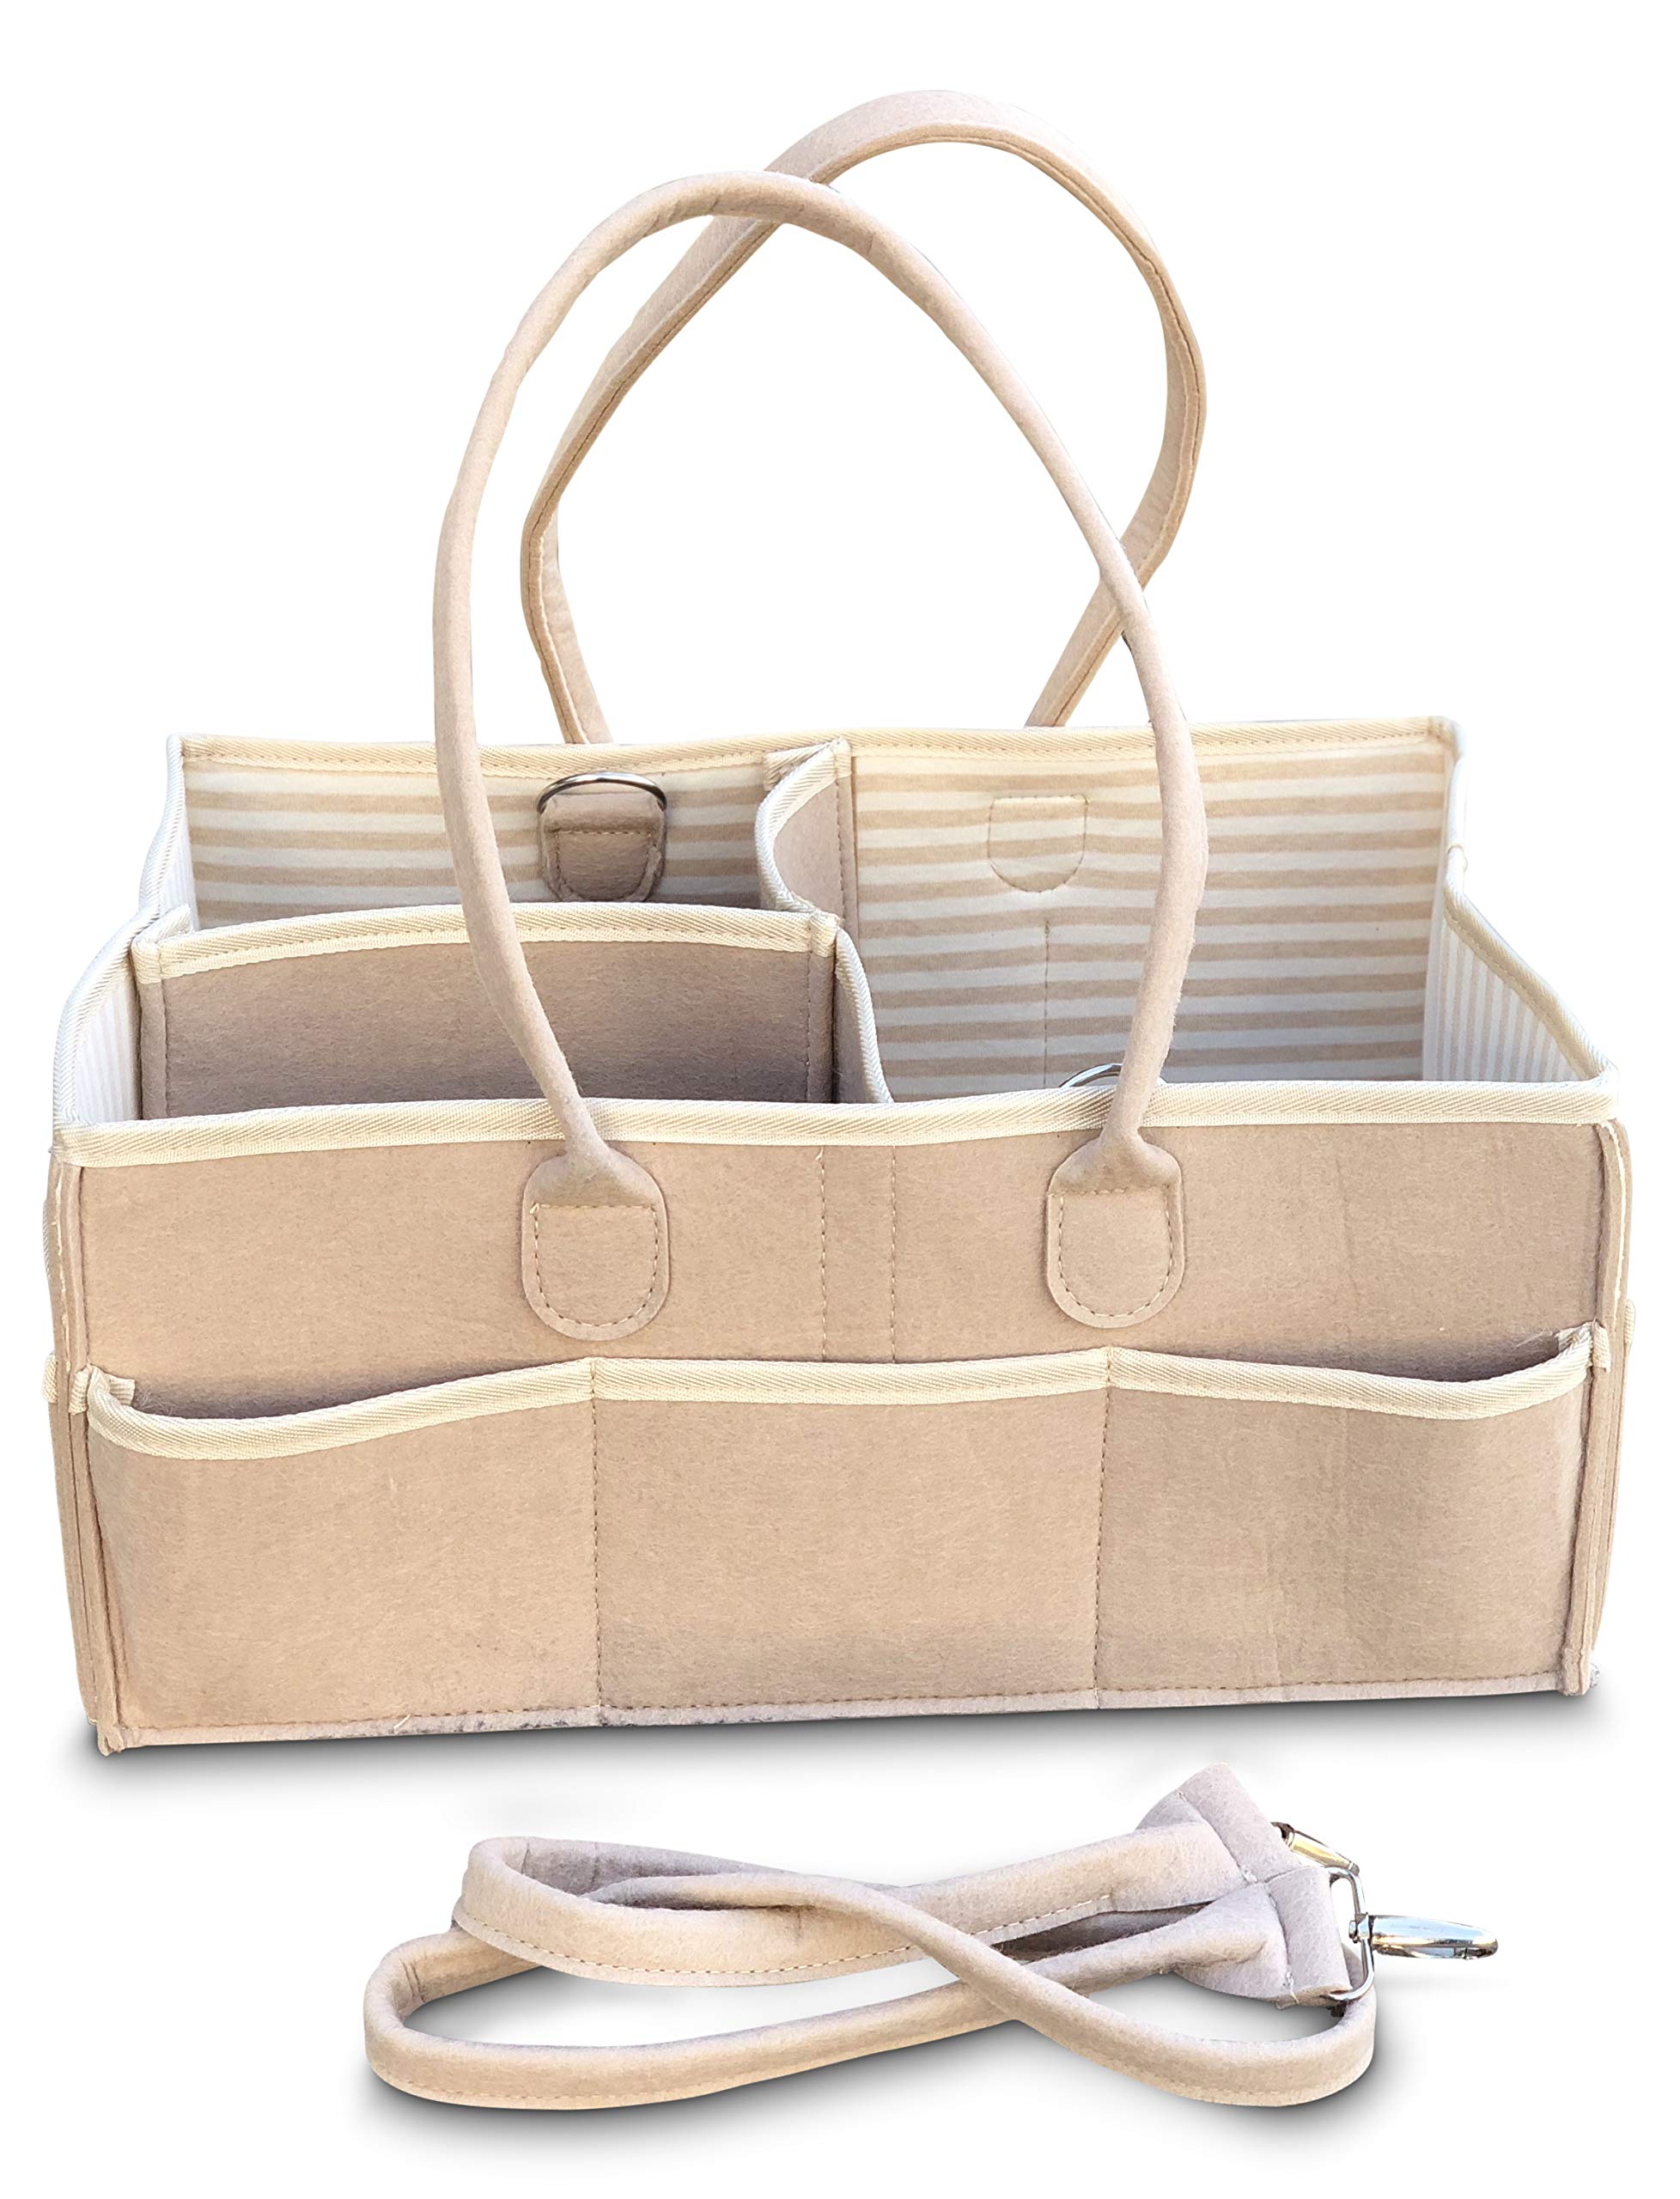 Book Cover Baby Diaper Caddy Organizer Bag -Organic Cotton Lining | Essential for Changing Station Table | Hypoallergenic Nursery Storage Bin Ex Large for wipes, diapers, & cream |Baby Shower Registry Must Have